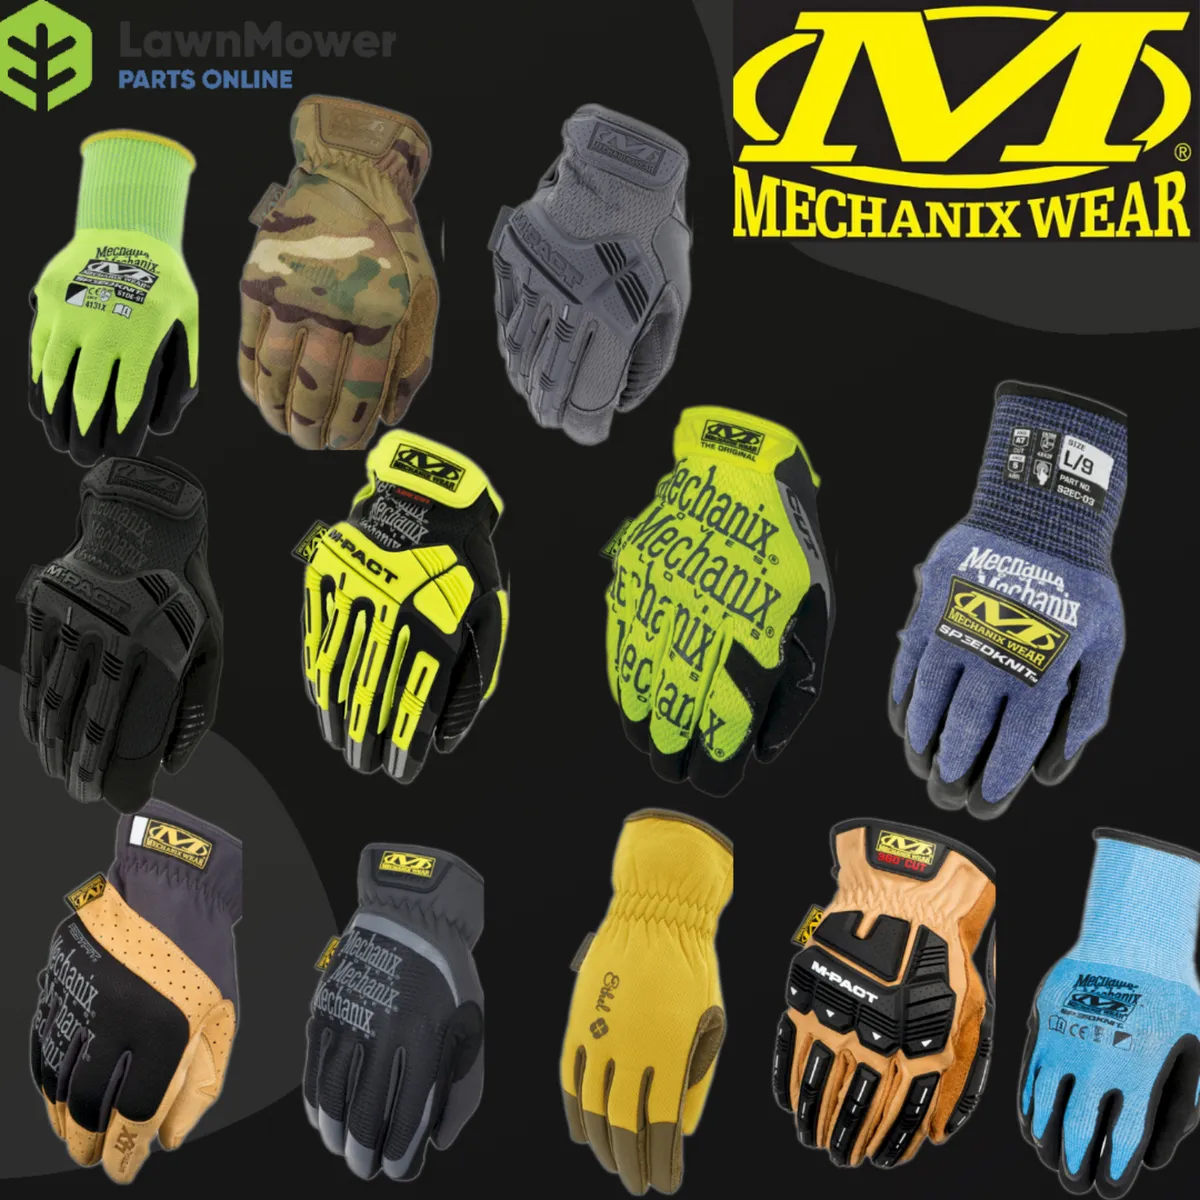 Mechanix Safety Wear Gloves: FREE DELIVERY